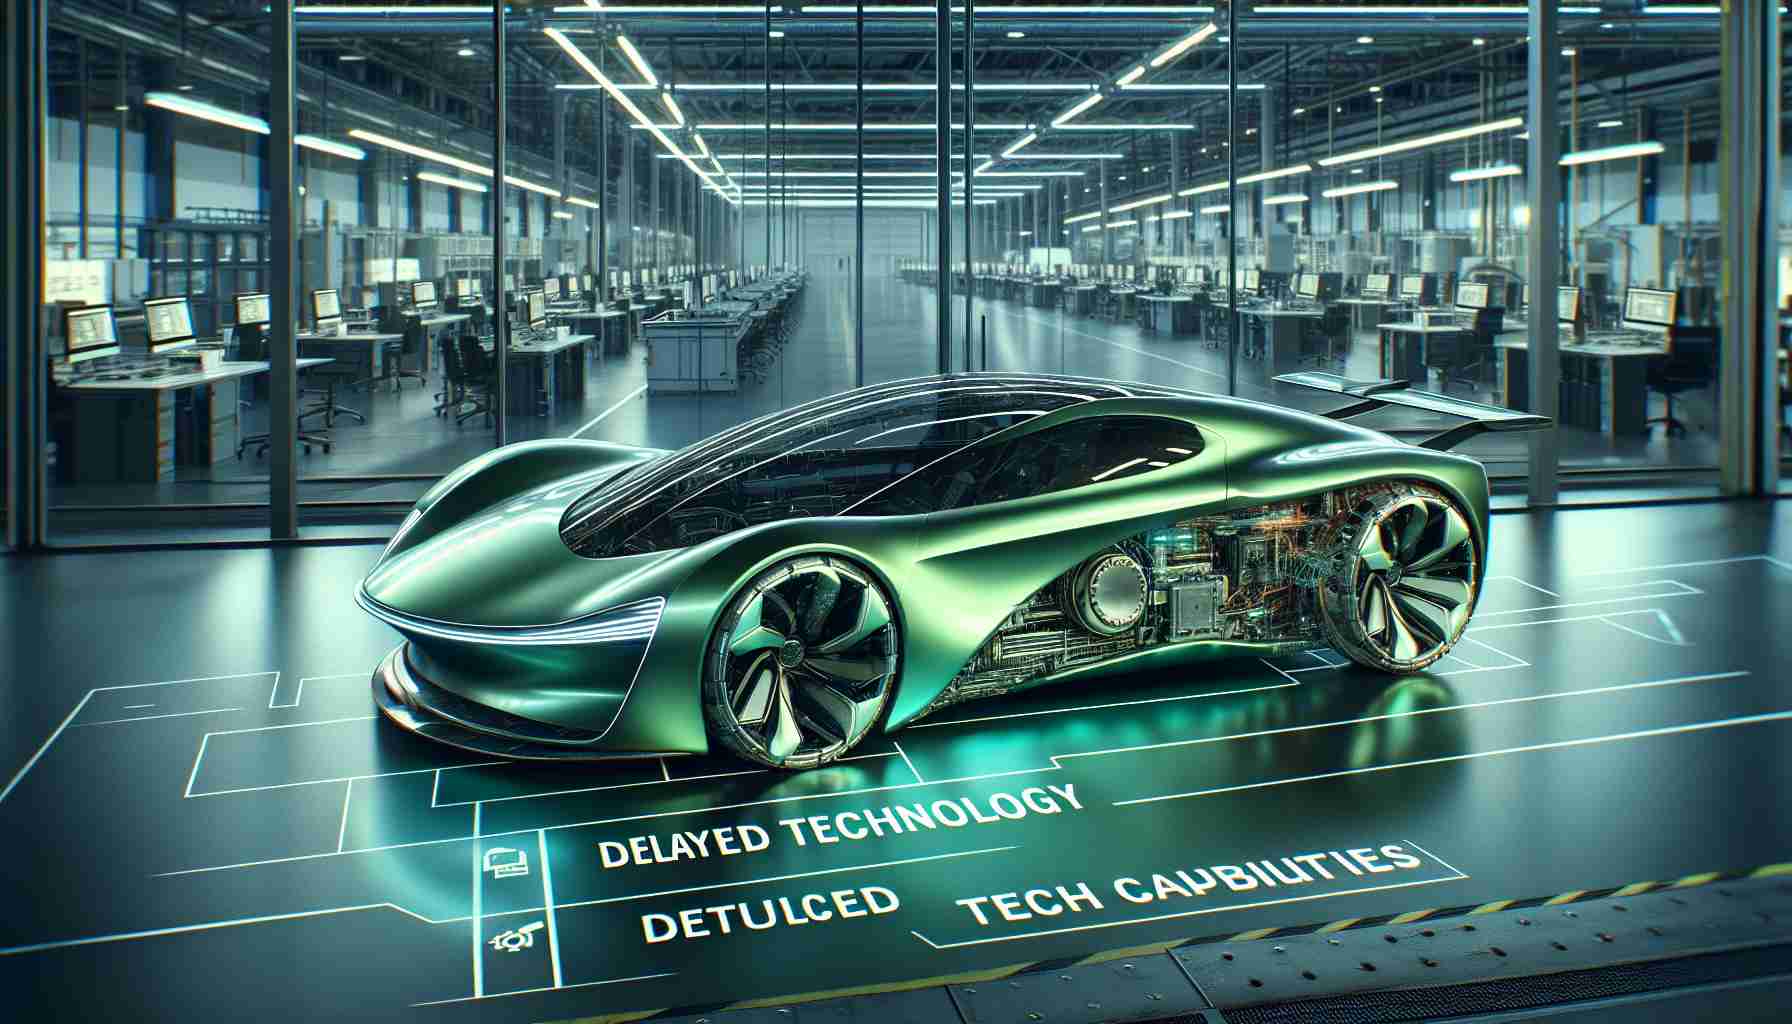 Apple Car Project Faces Setback as Launch Delayed and Technological Capabilities Reduced